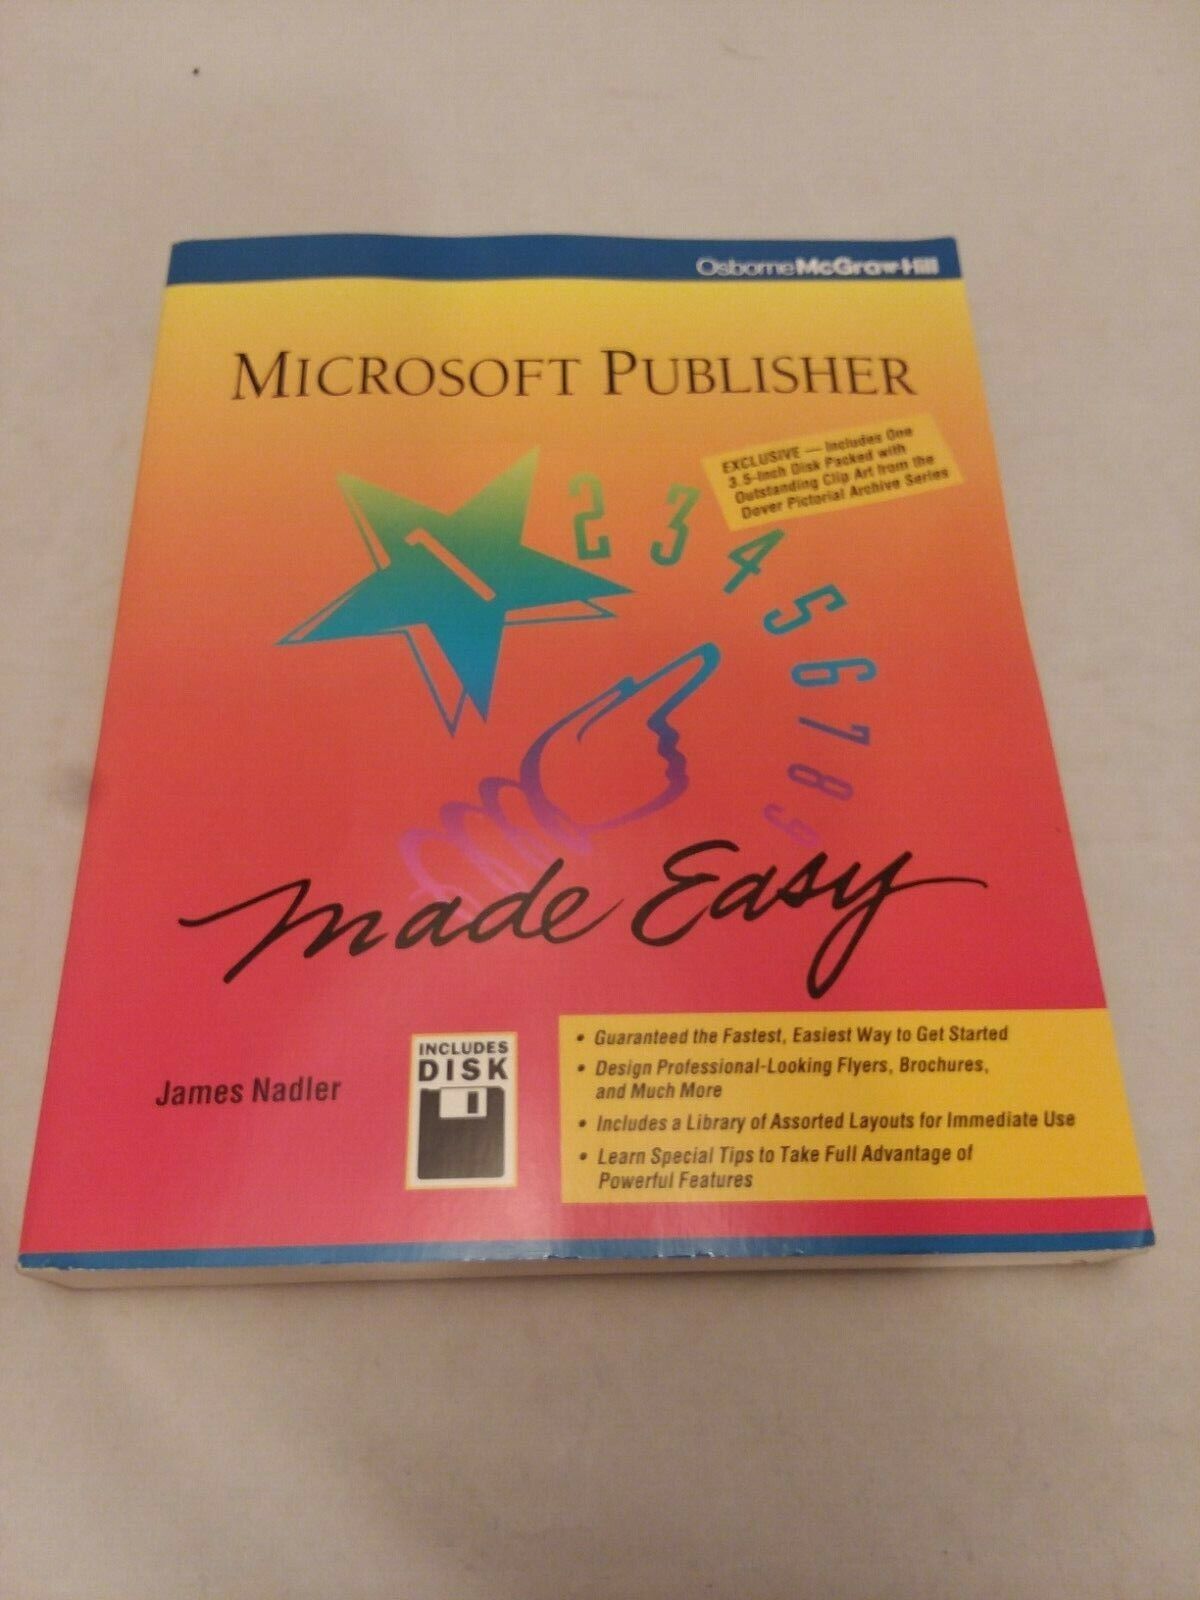 Microsoft Publisher Made Easy 1992 Softcover Book w Disk Vintage Computer Guide